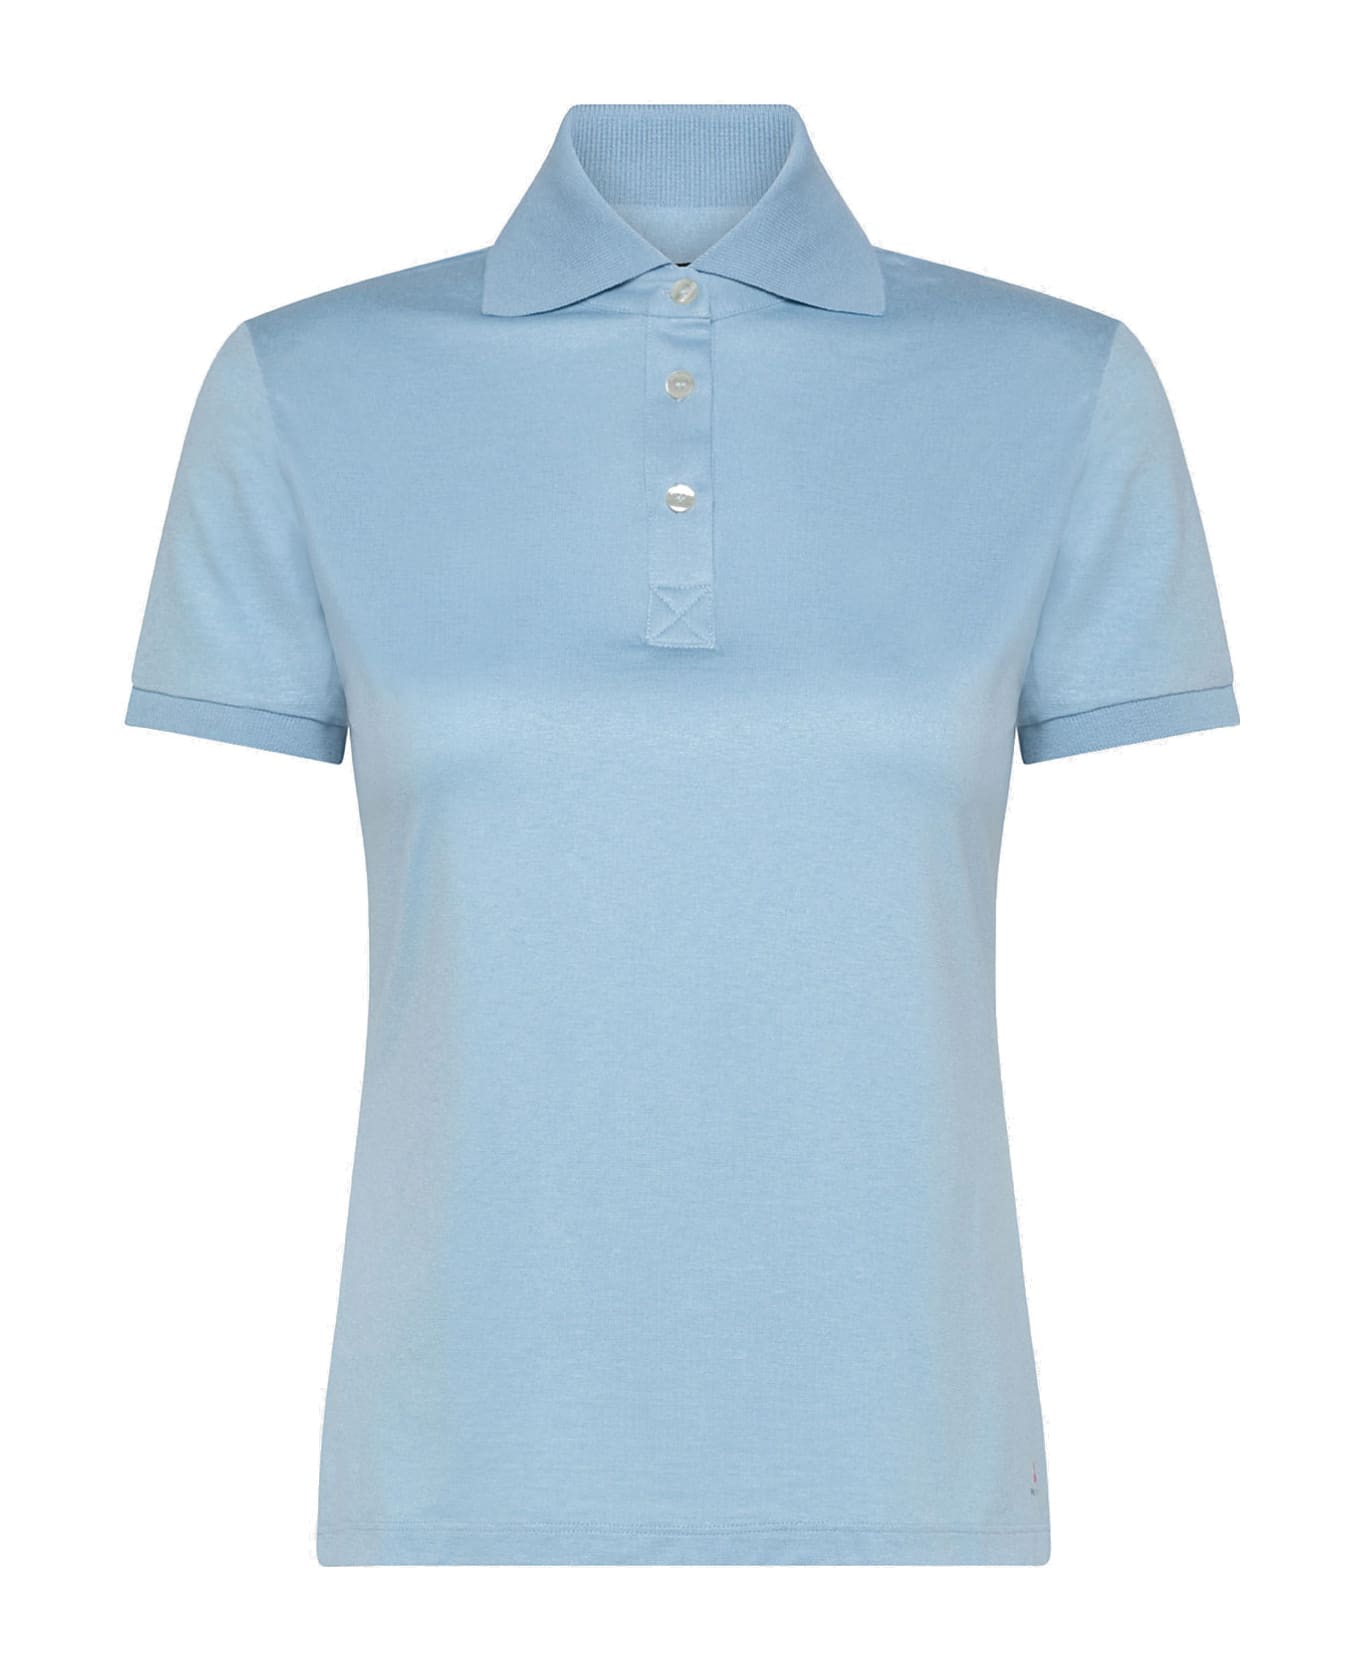 Peuterey Polo With 3 Buttons - AZZURRO ポロシャツ